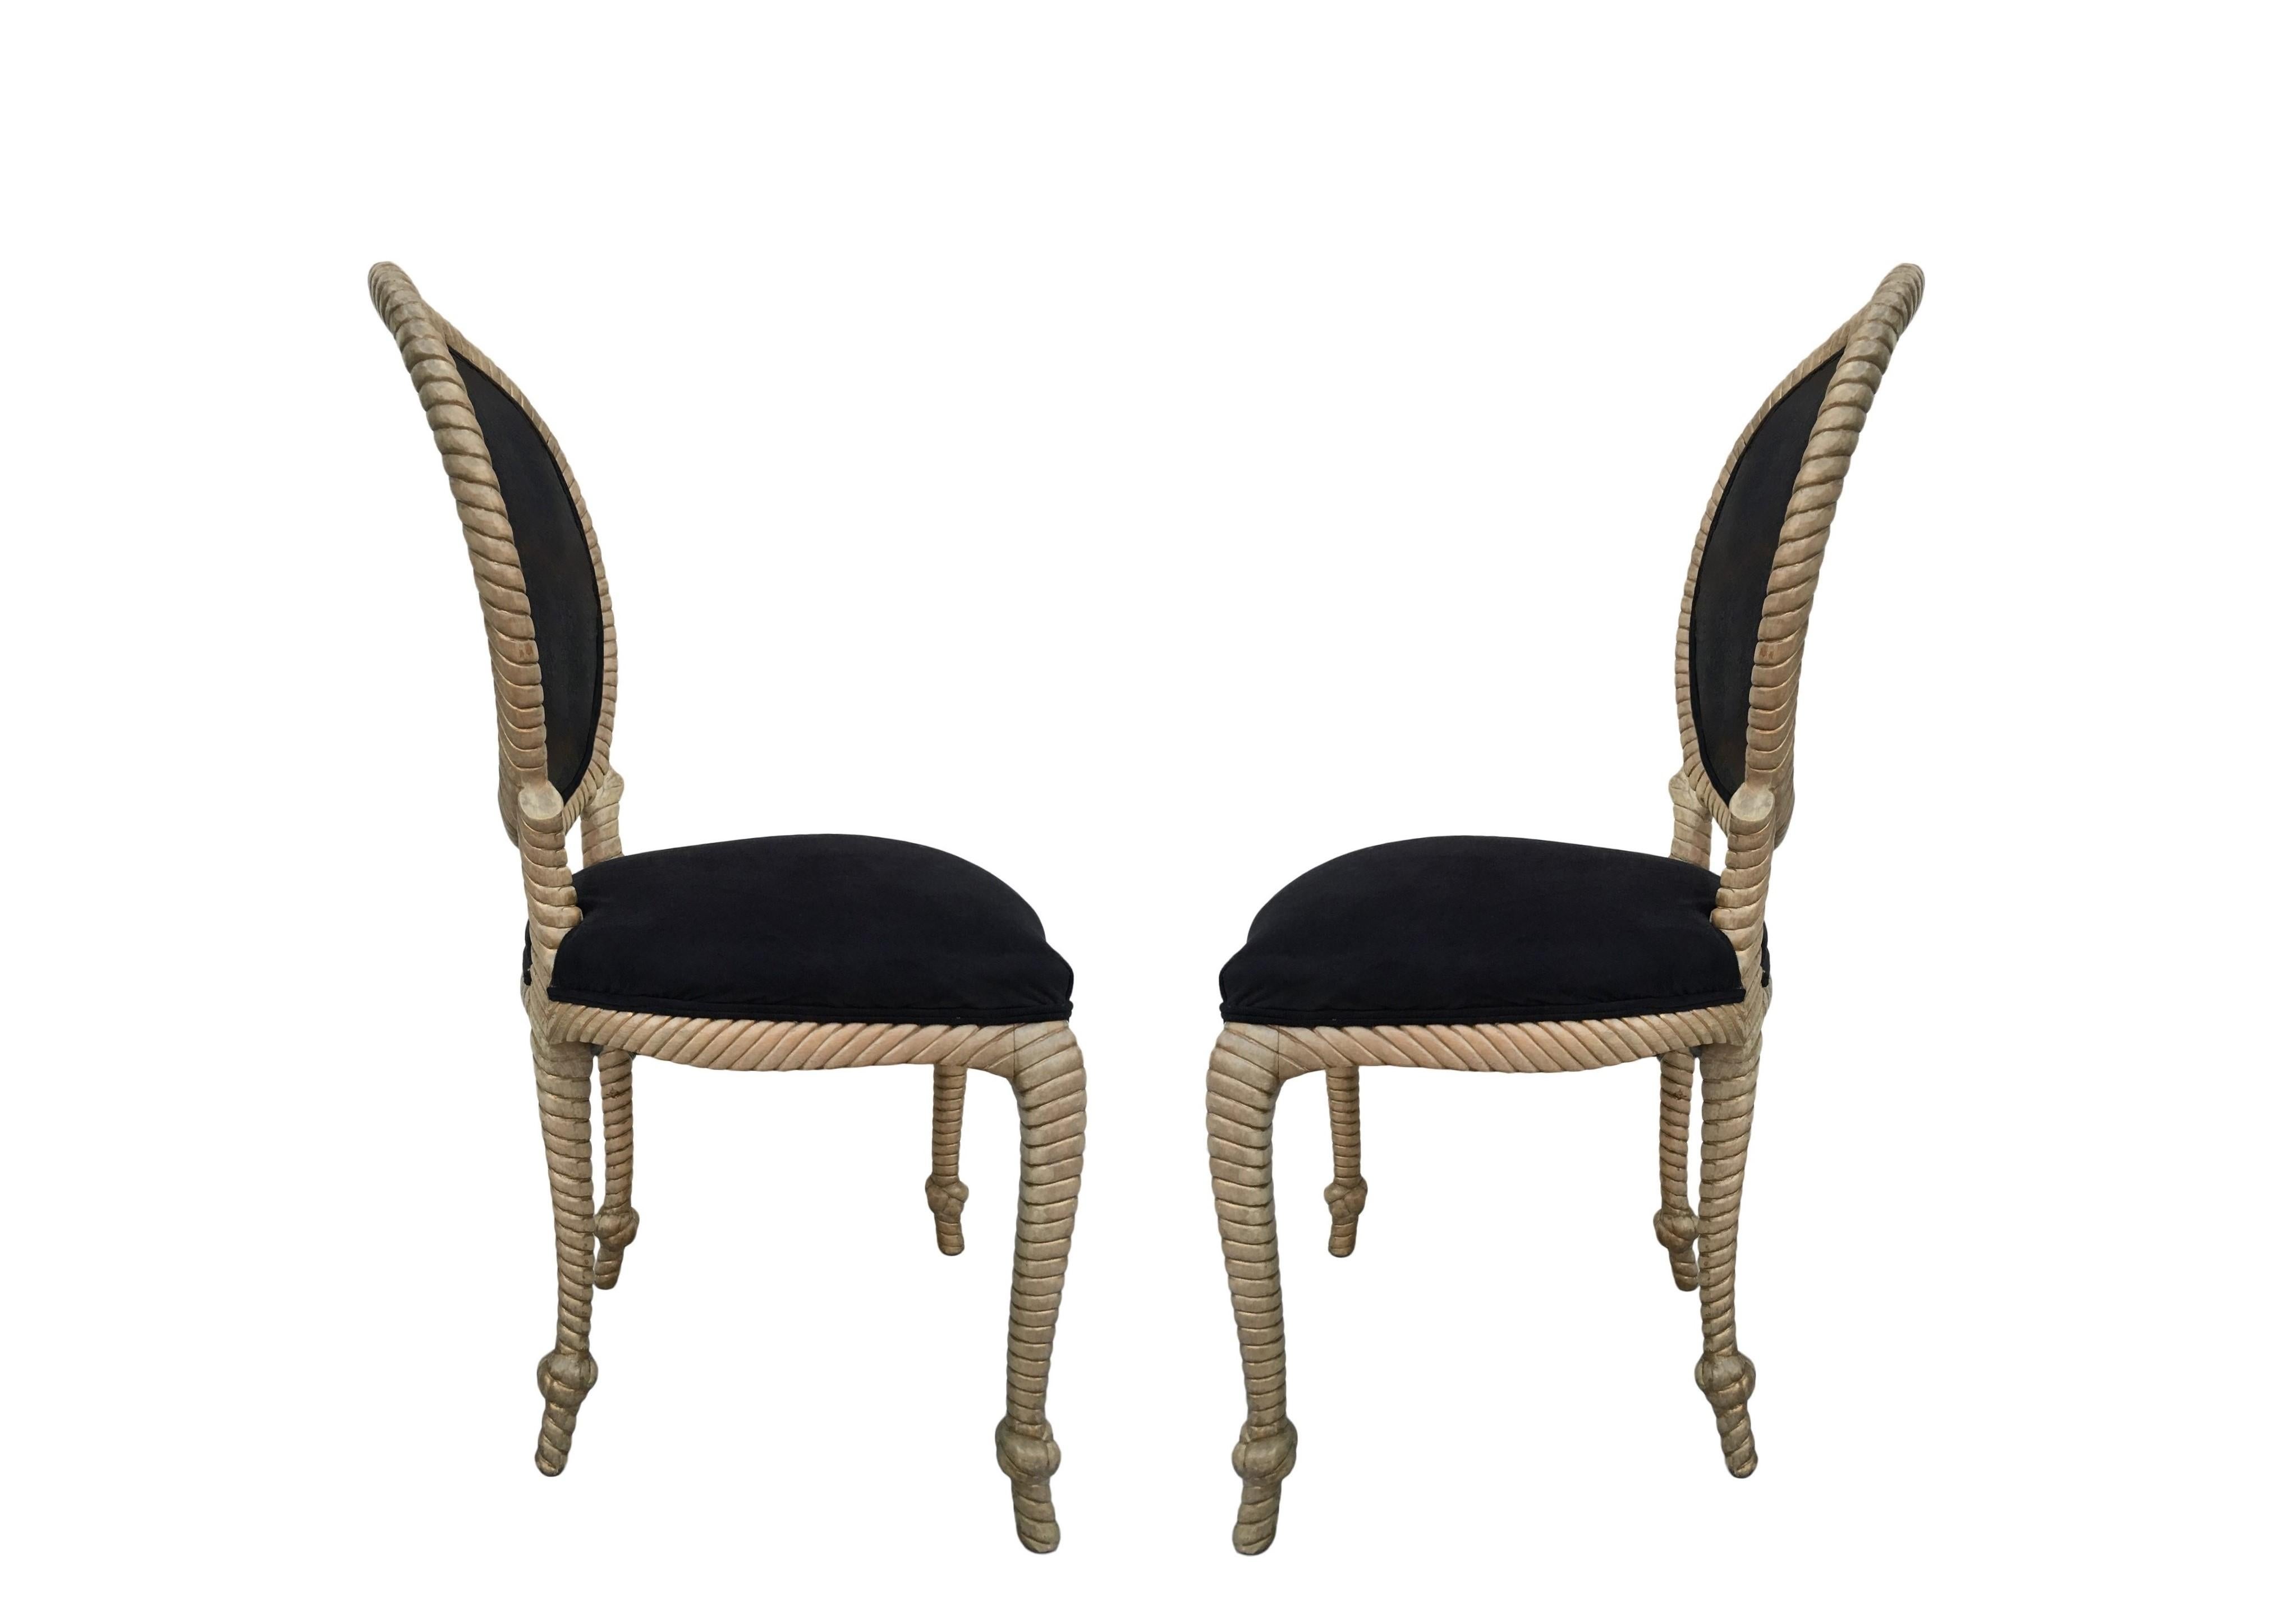 20th Century Italian Comini & Modonutti Carved Knotted Rope Chairs, Set of 8 For Sale